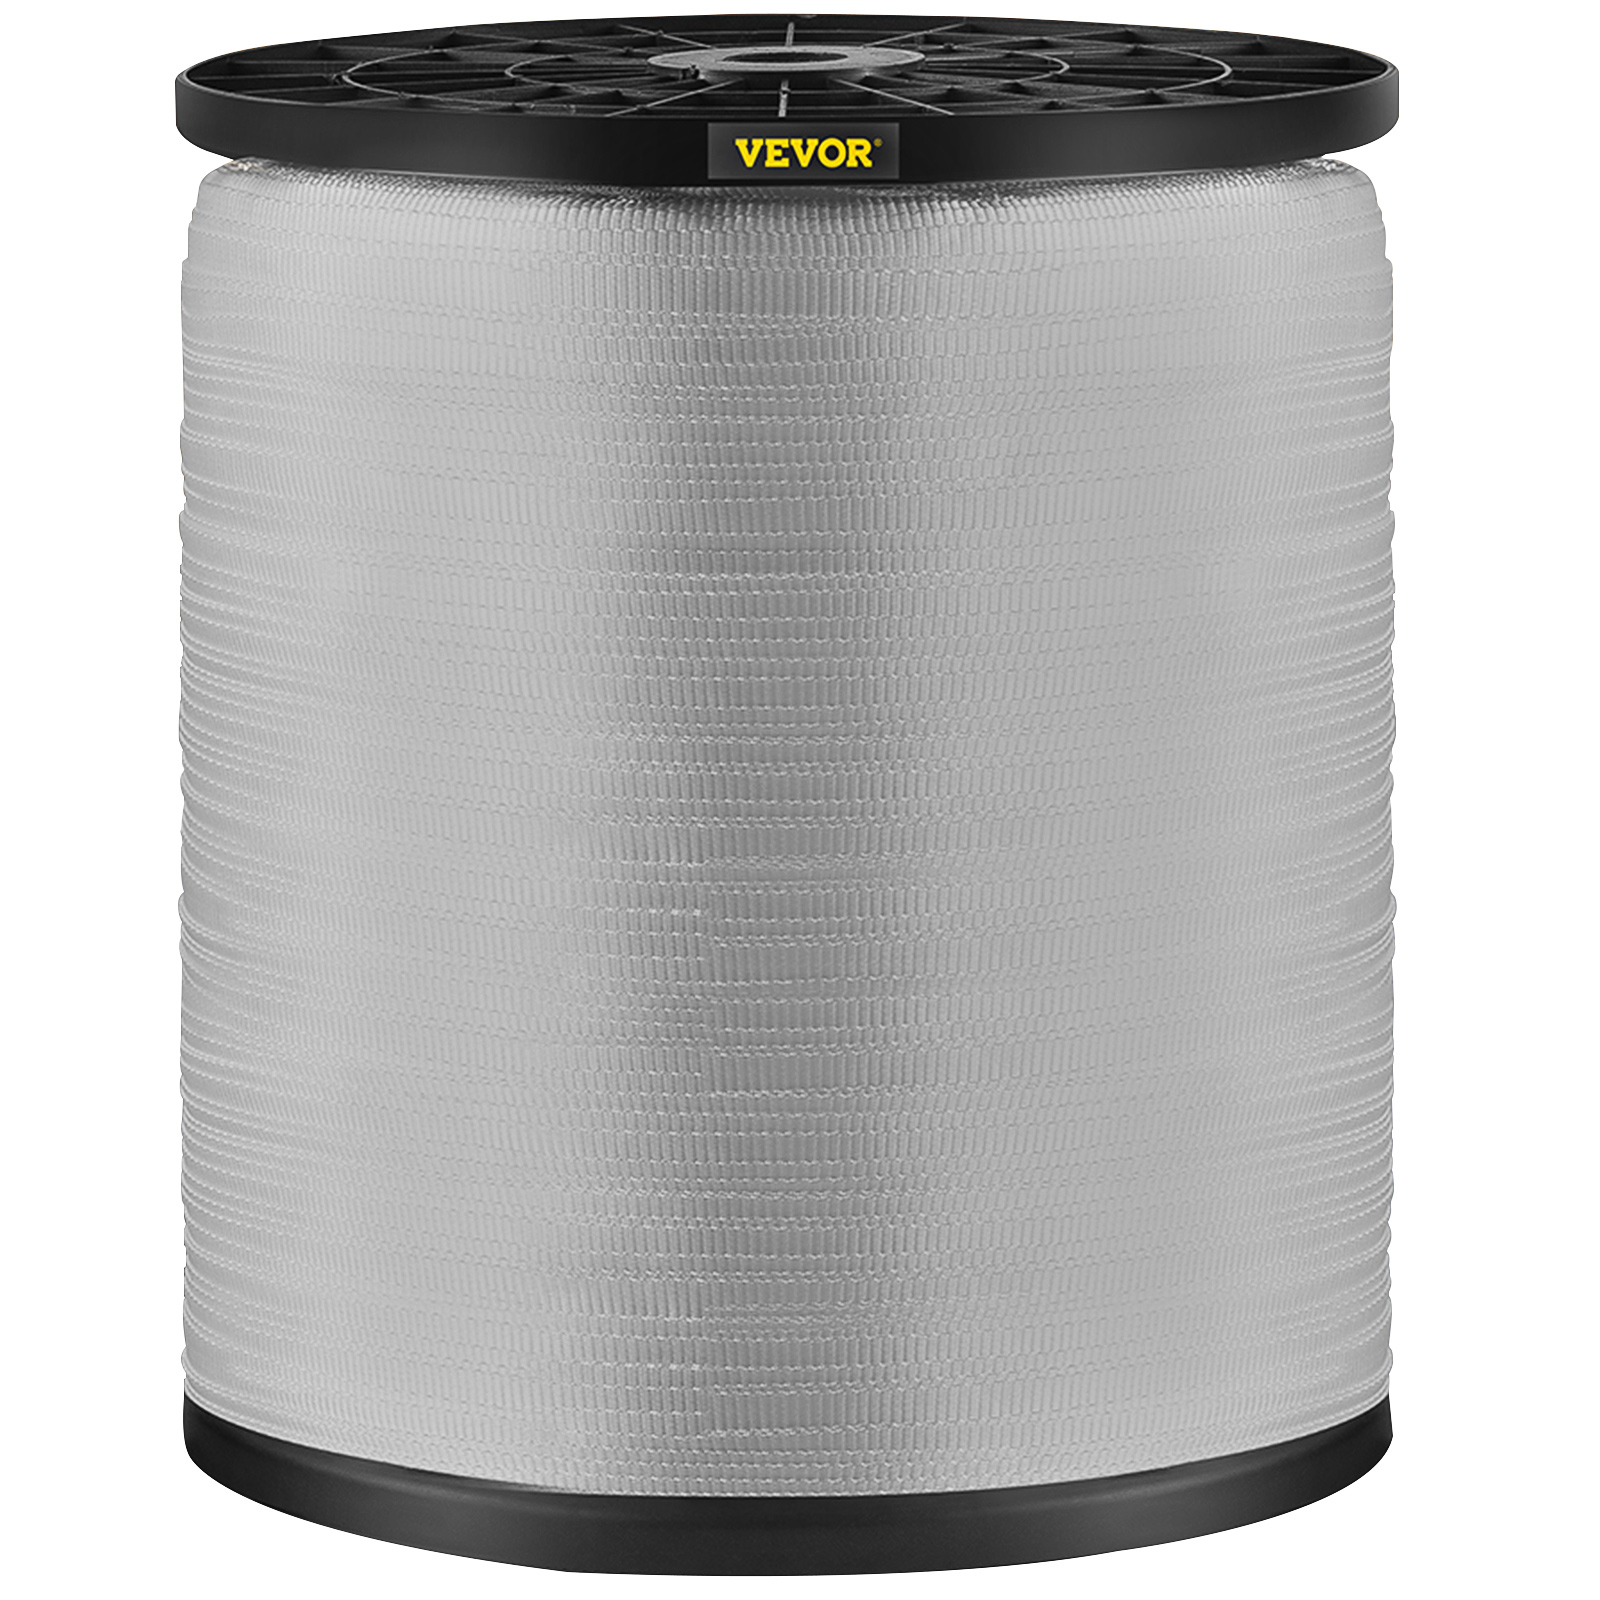 Vevor 3/8" X 1053' Polyester Pull Tape Flat Rope 1130 Lbs Tensile Capacity от Vevor Many GEOs